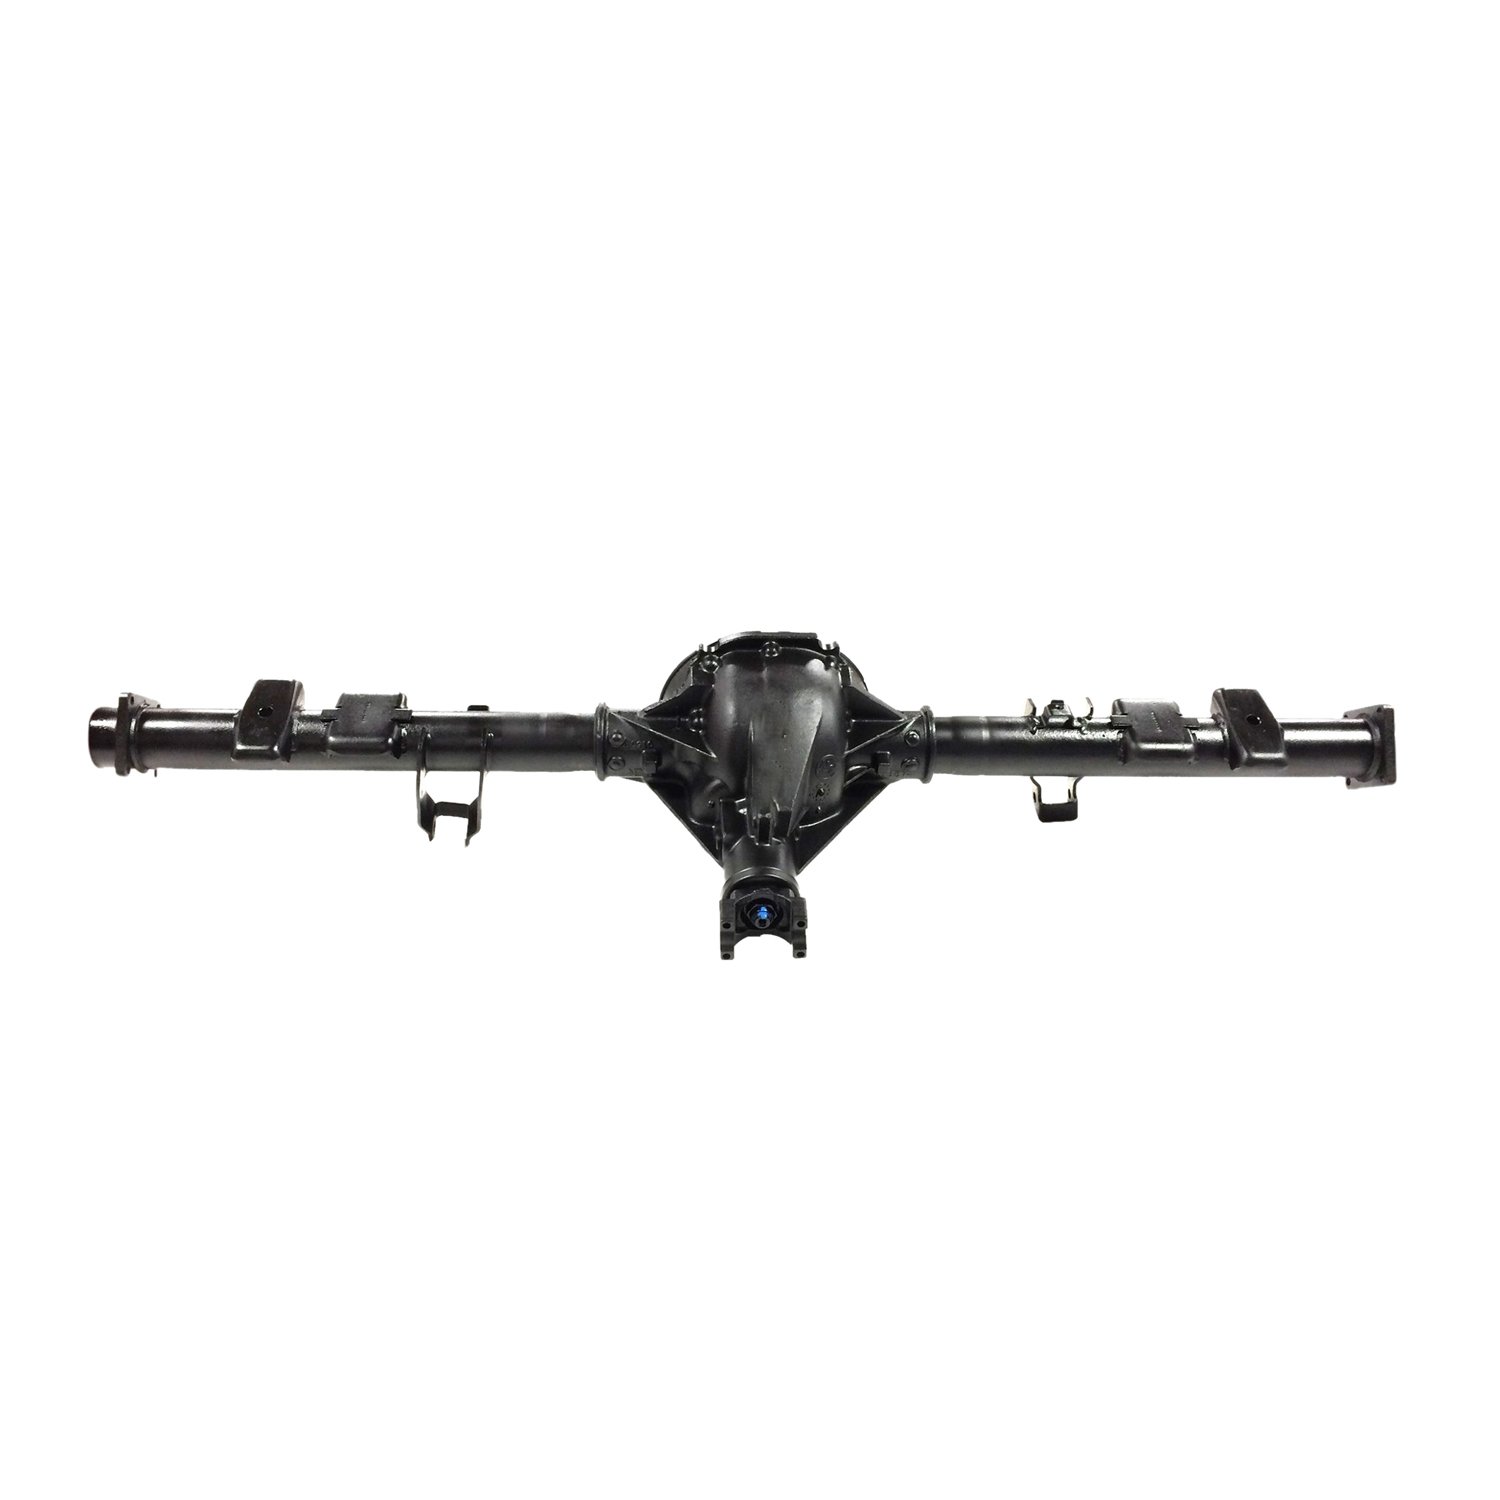 Remanufactured Axle Assy for GM 8.5" 95-97 S10 Blazer & S15 Jimmy,3.42 , 2wd, Posi LSD